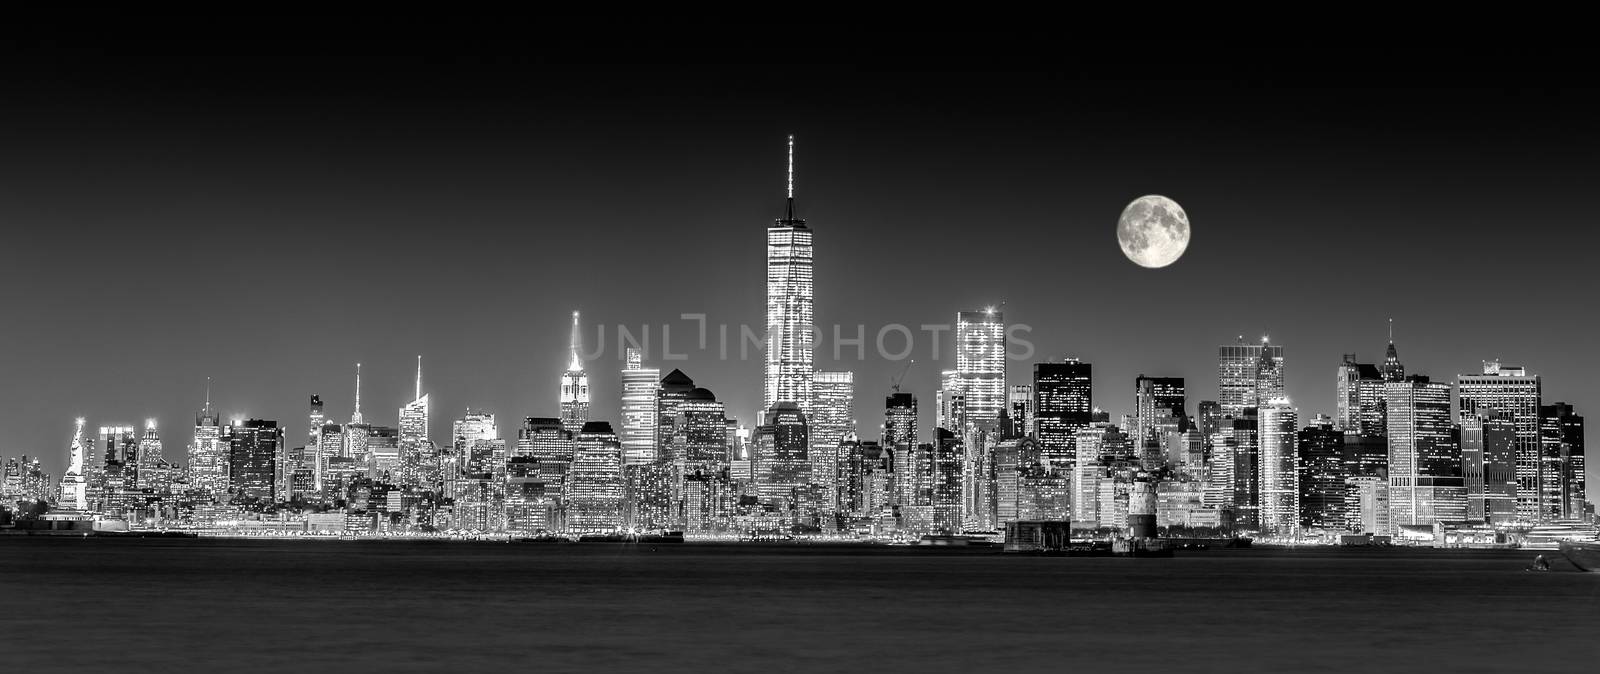 New York City Manhattan downtown skyline at dusk with skyscrapers illuminated over Hudson River panorama. Horizontal composition, copy space. Black and white image.